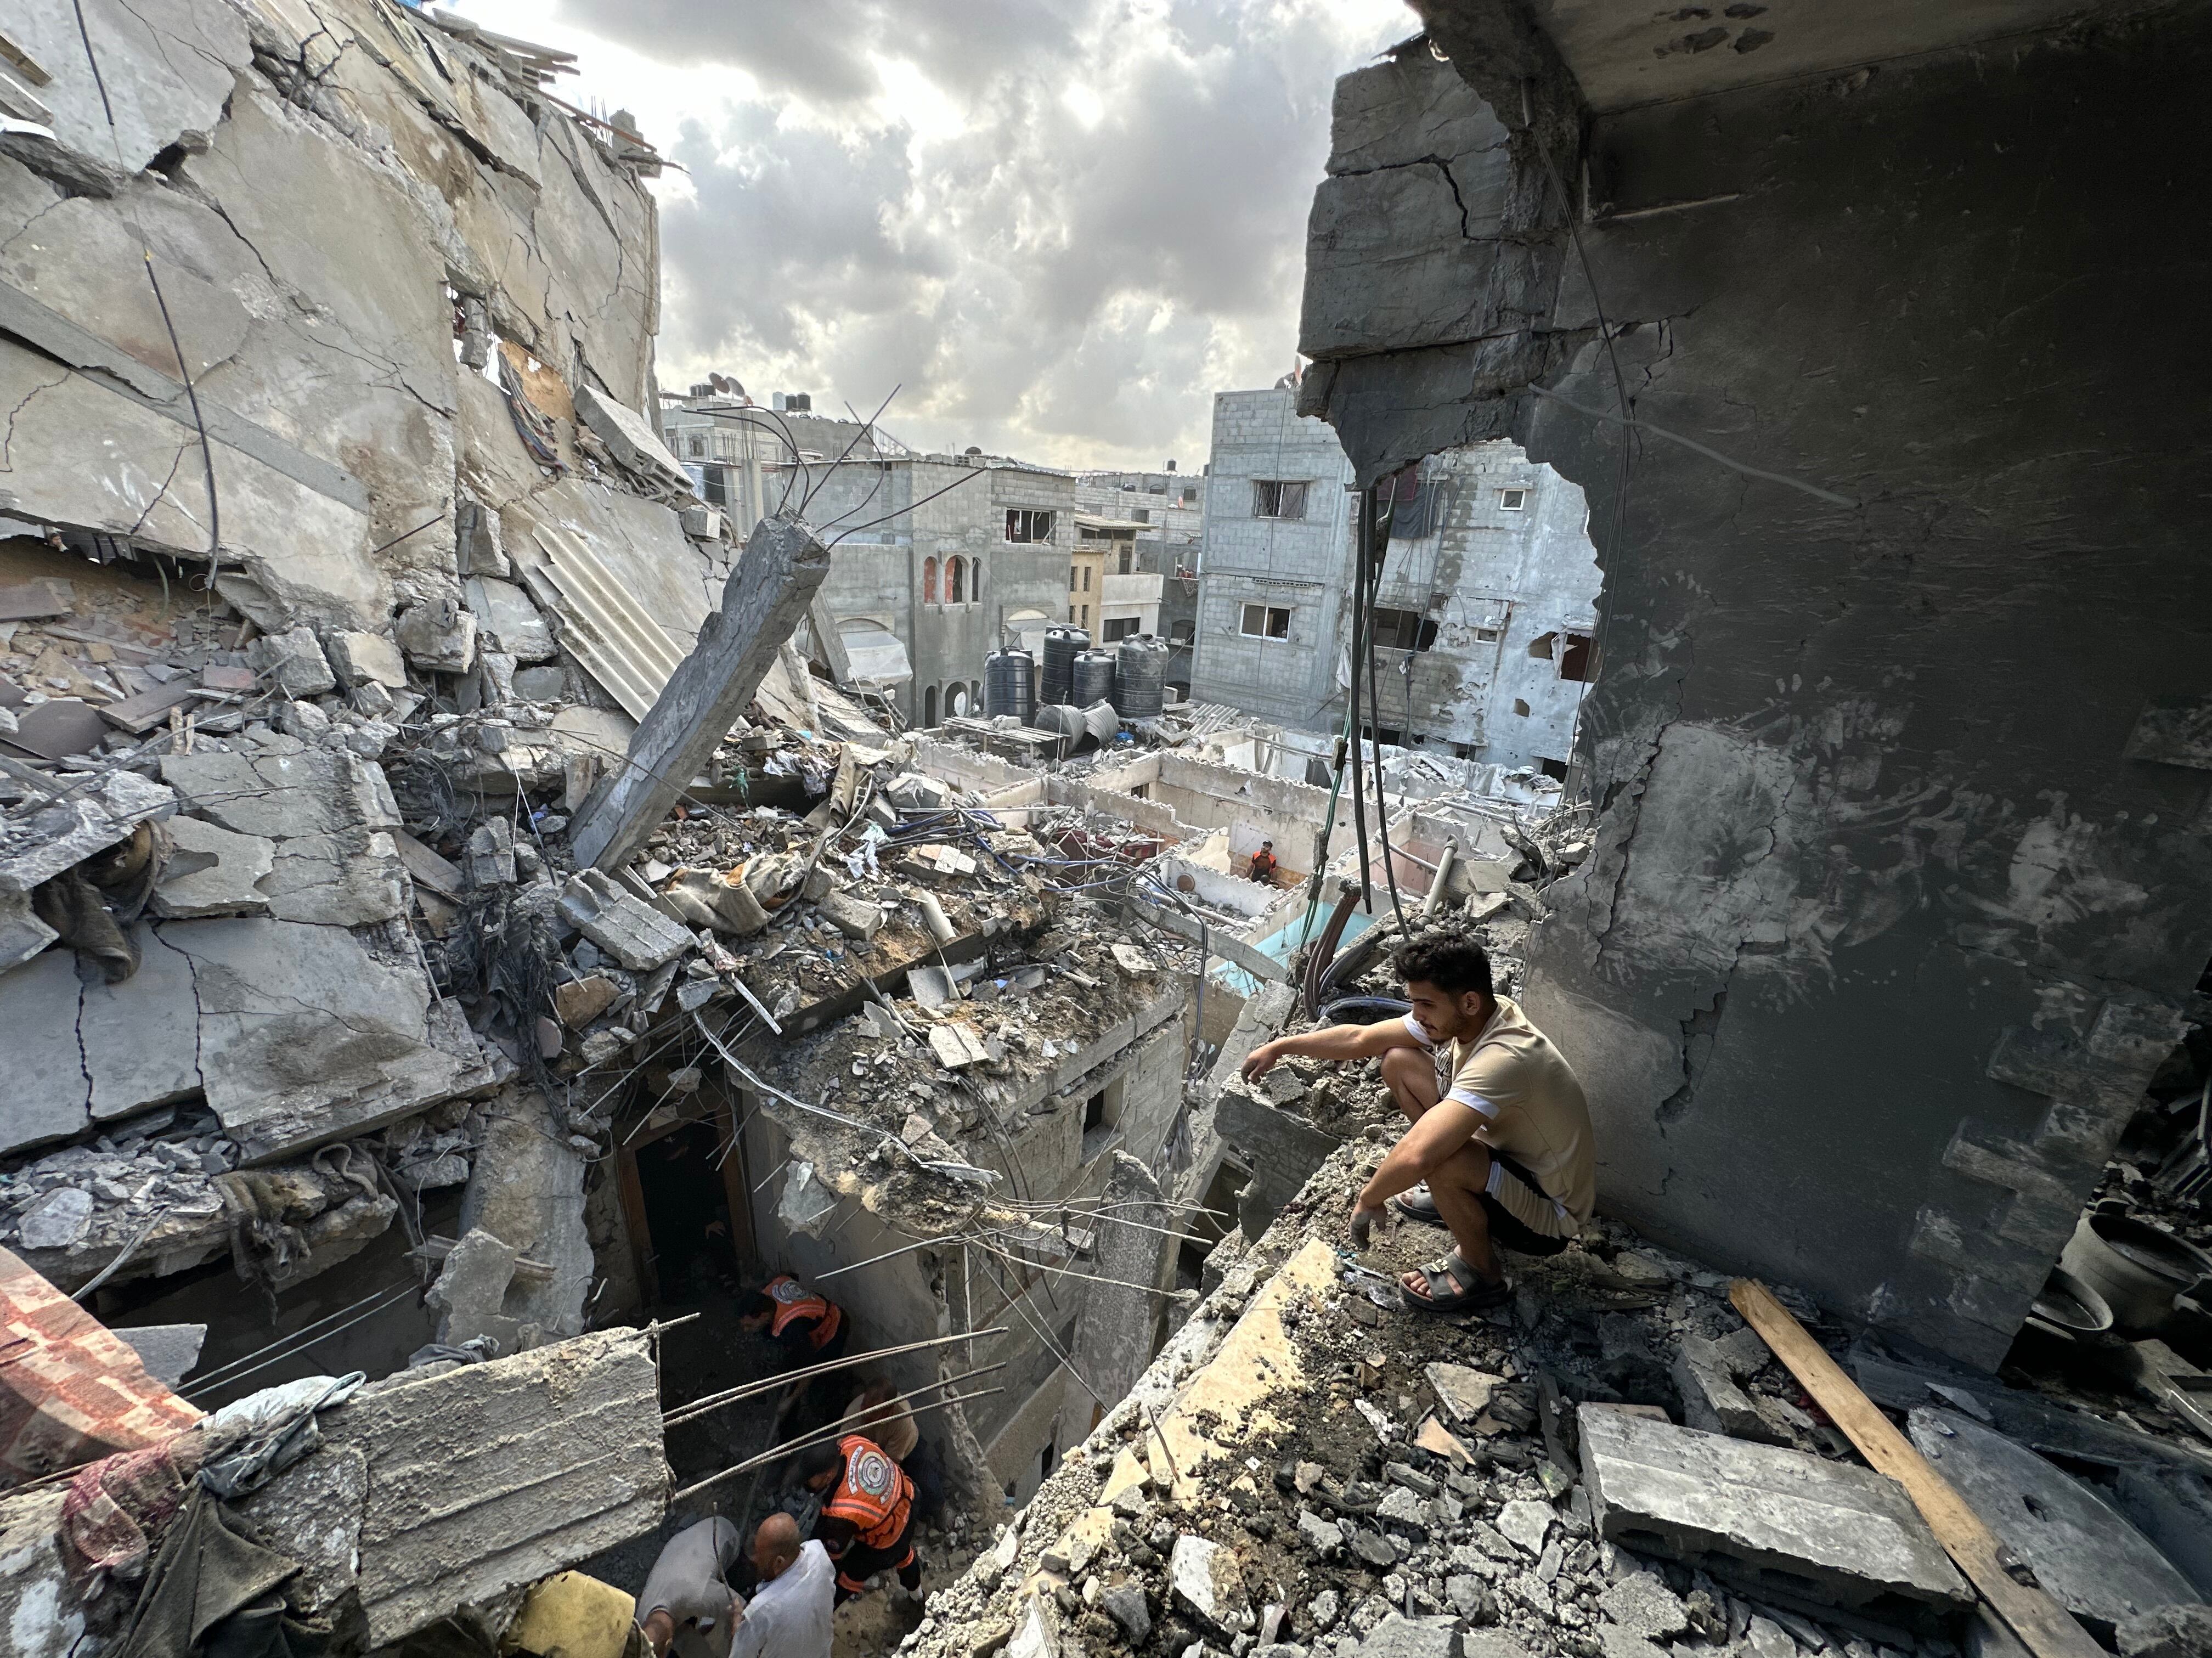 Rescue workers search under the rubble of a building in Rafah outside the evacuation zone that was hit by an Israeli airstrike on Tuesday. Health officials in Gaza say at least 13 people from one family were killed in that attack.